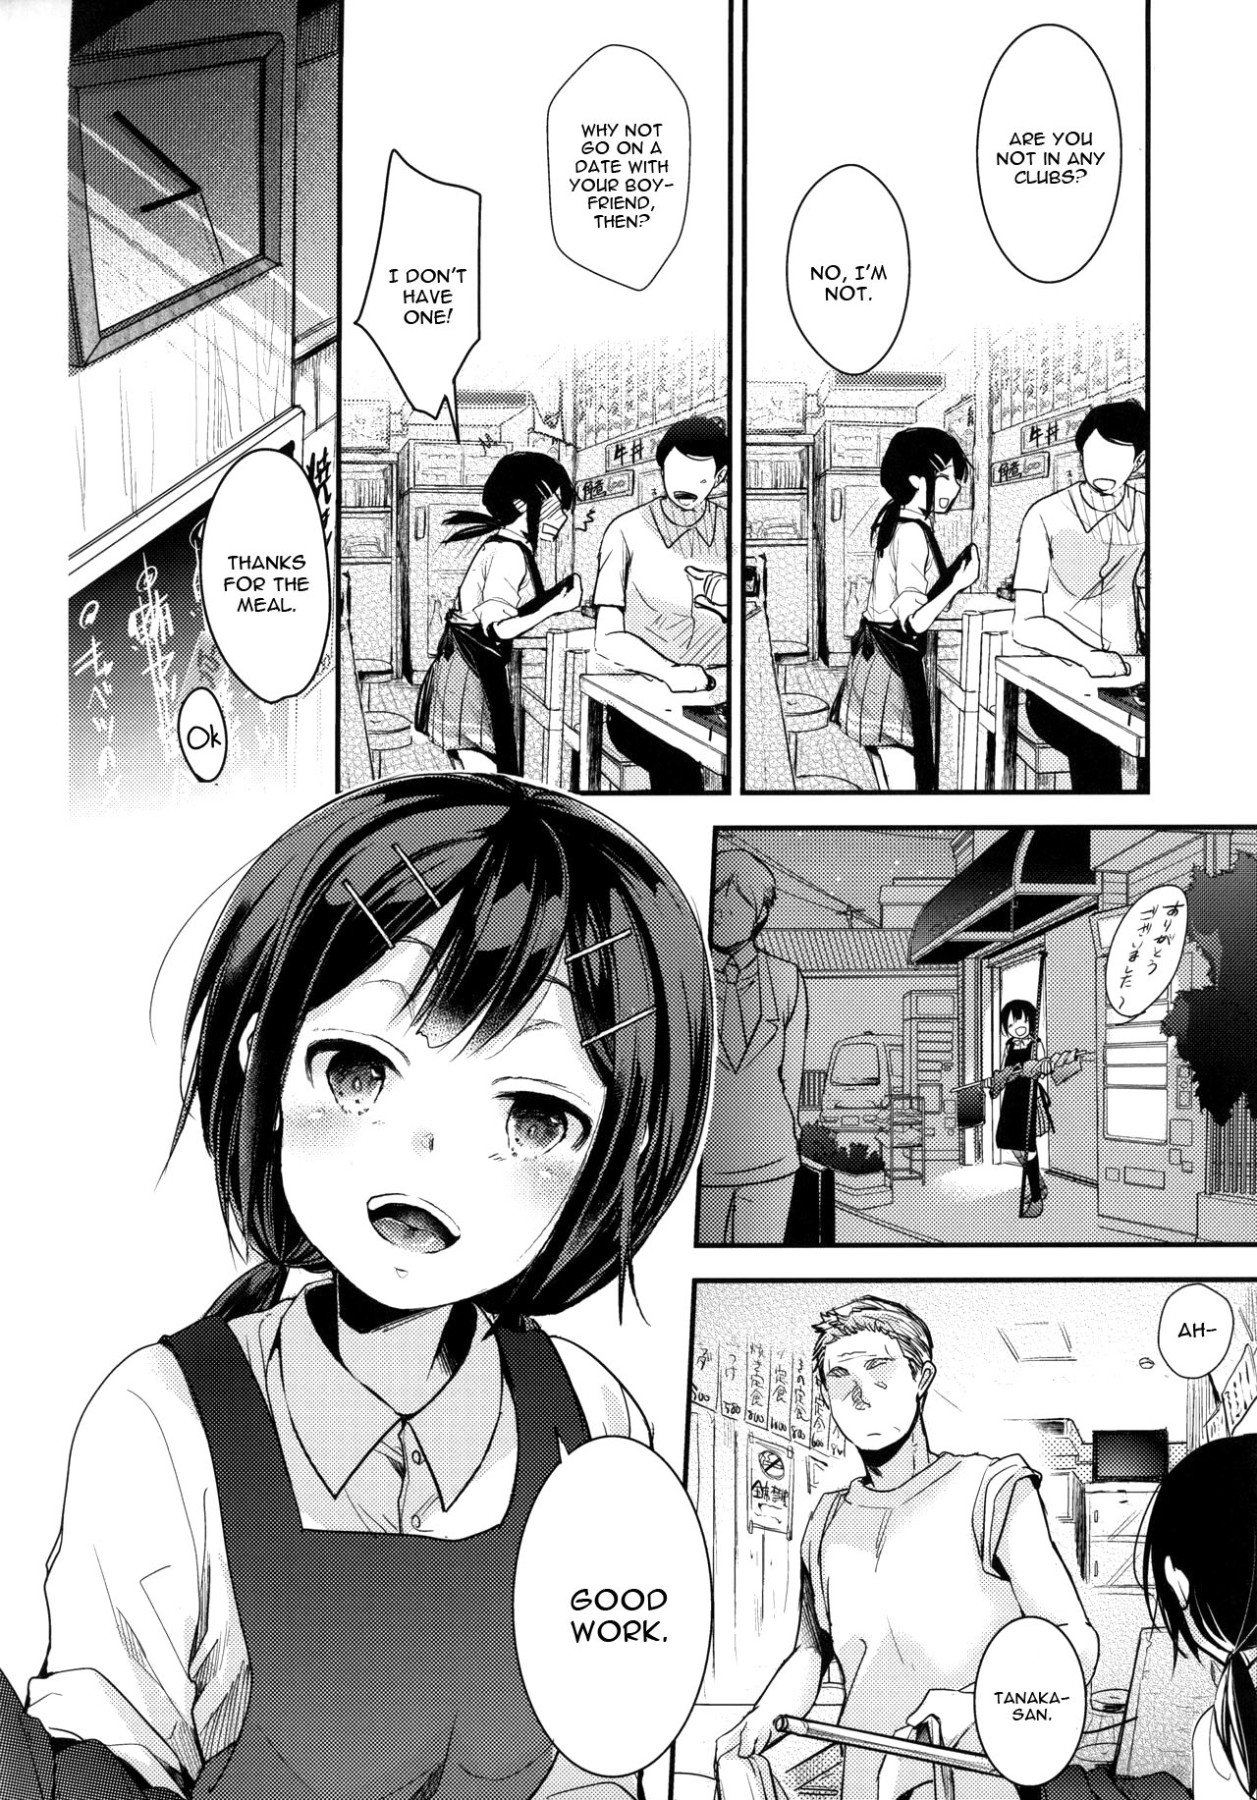 Hentai Manga Comic-A Story About Fucking a Delicious Looking Woman Right In Front Of Work - Restaurant Edition-Read-3